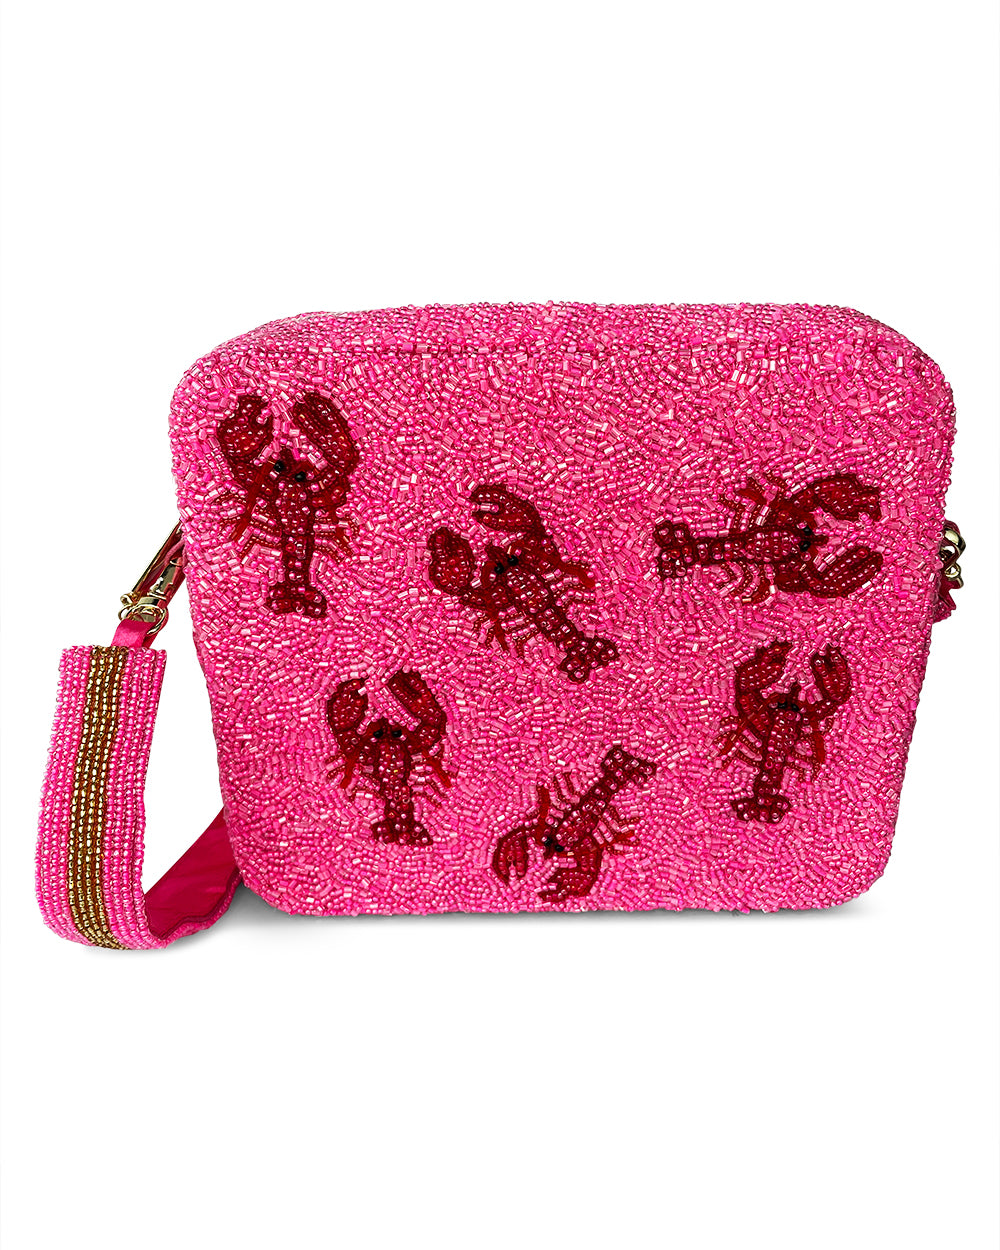 Lobster Box Bag Pink and Red